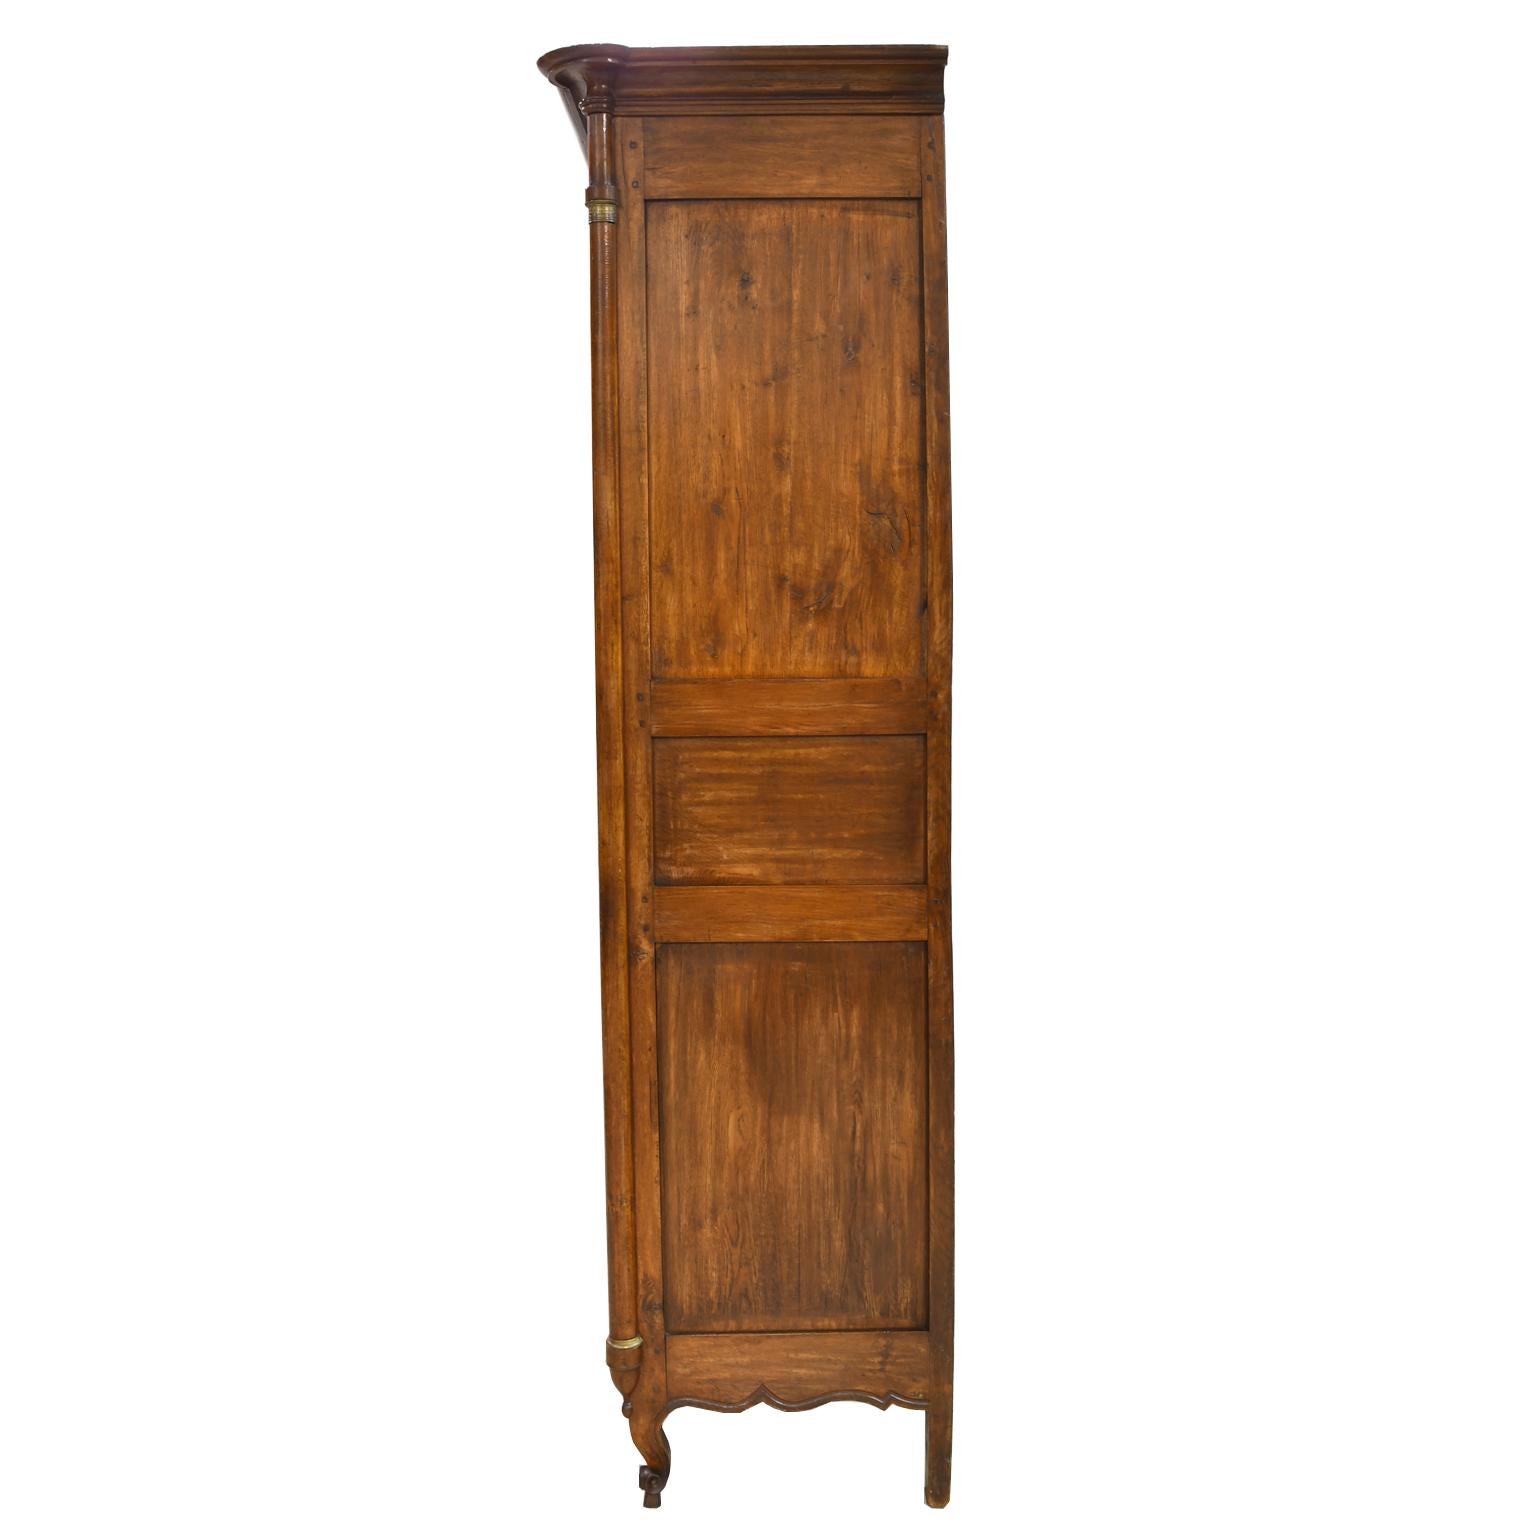 Polished Antique 18th Century French Empire Armoire in Oak with Interior Storage Drawers